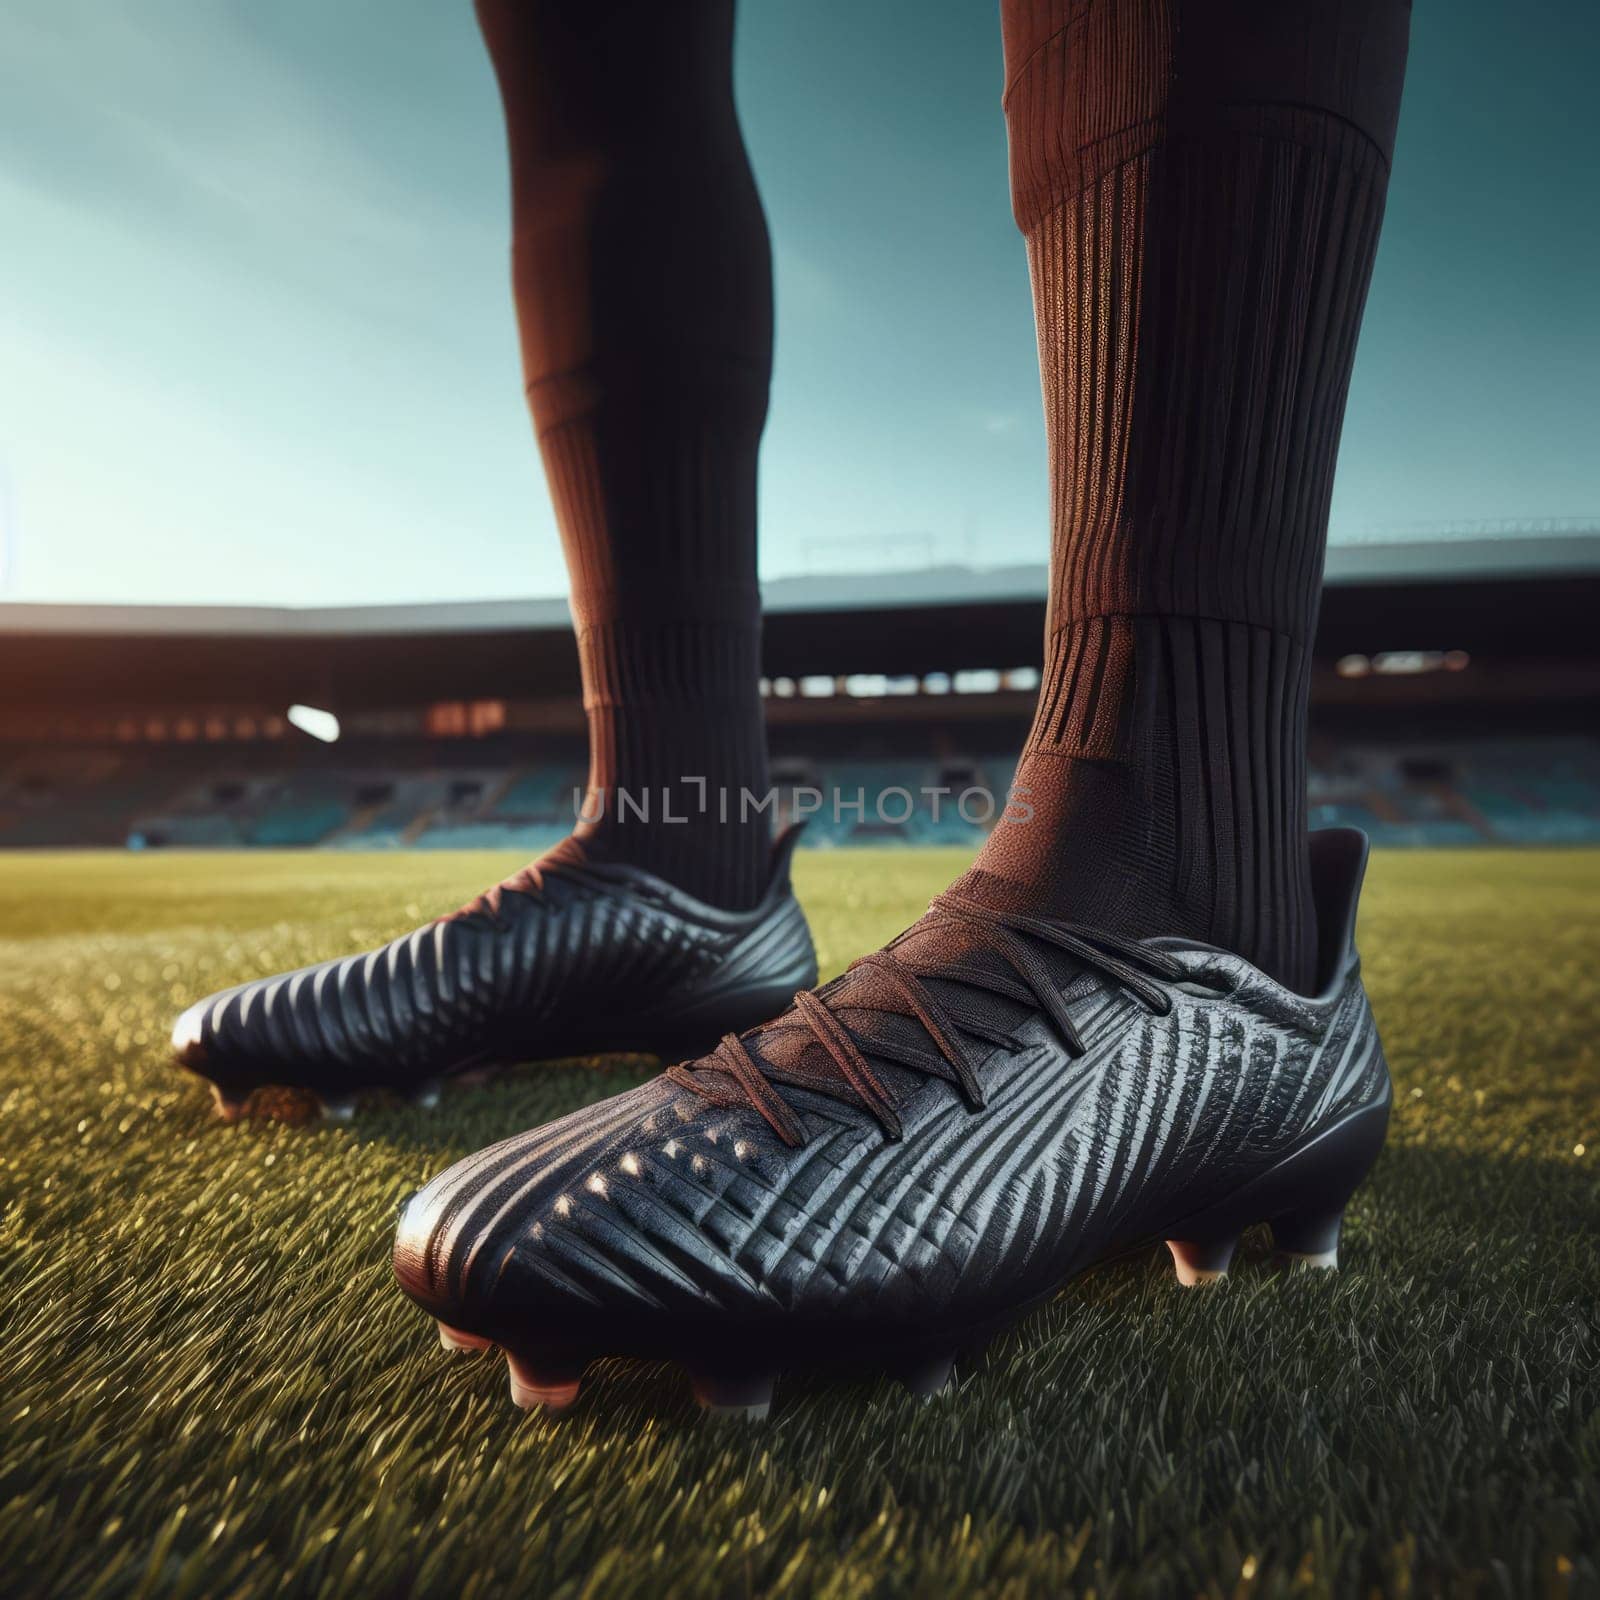 Close-up of a soccer player's feet in black cleats on a vibrant green field in a stadium